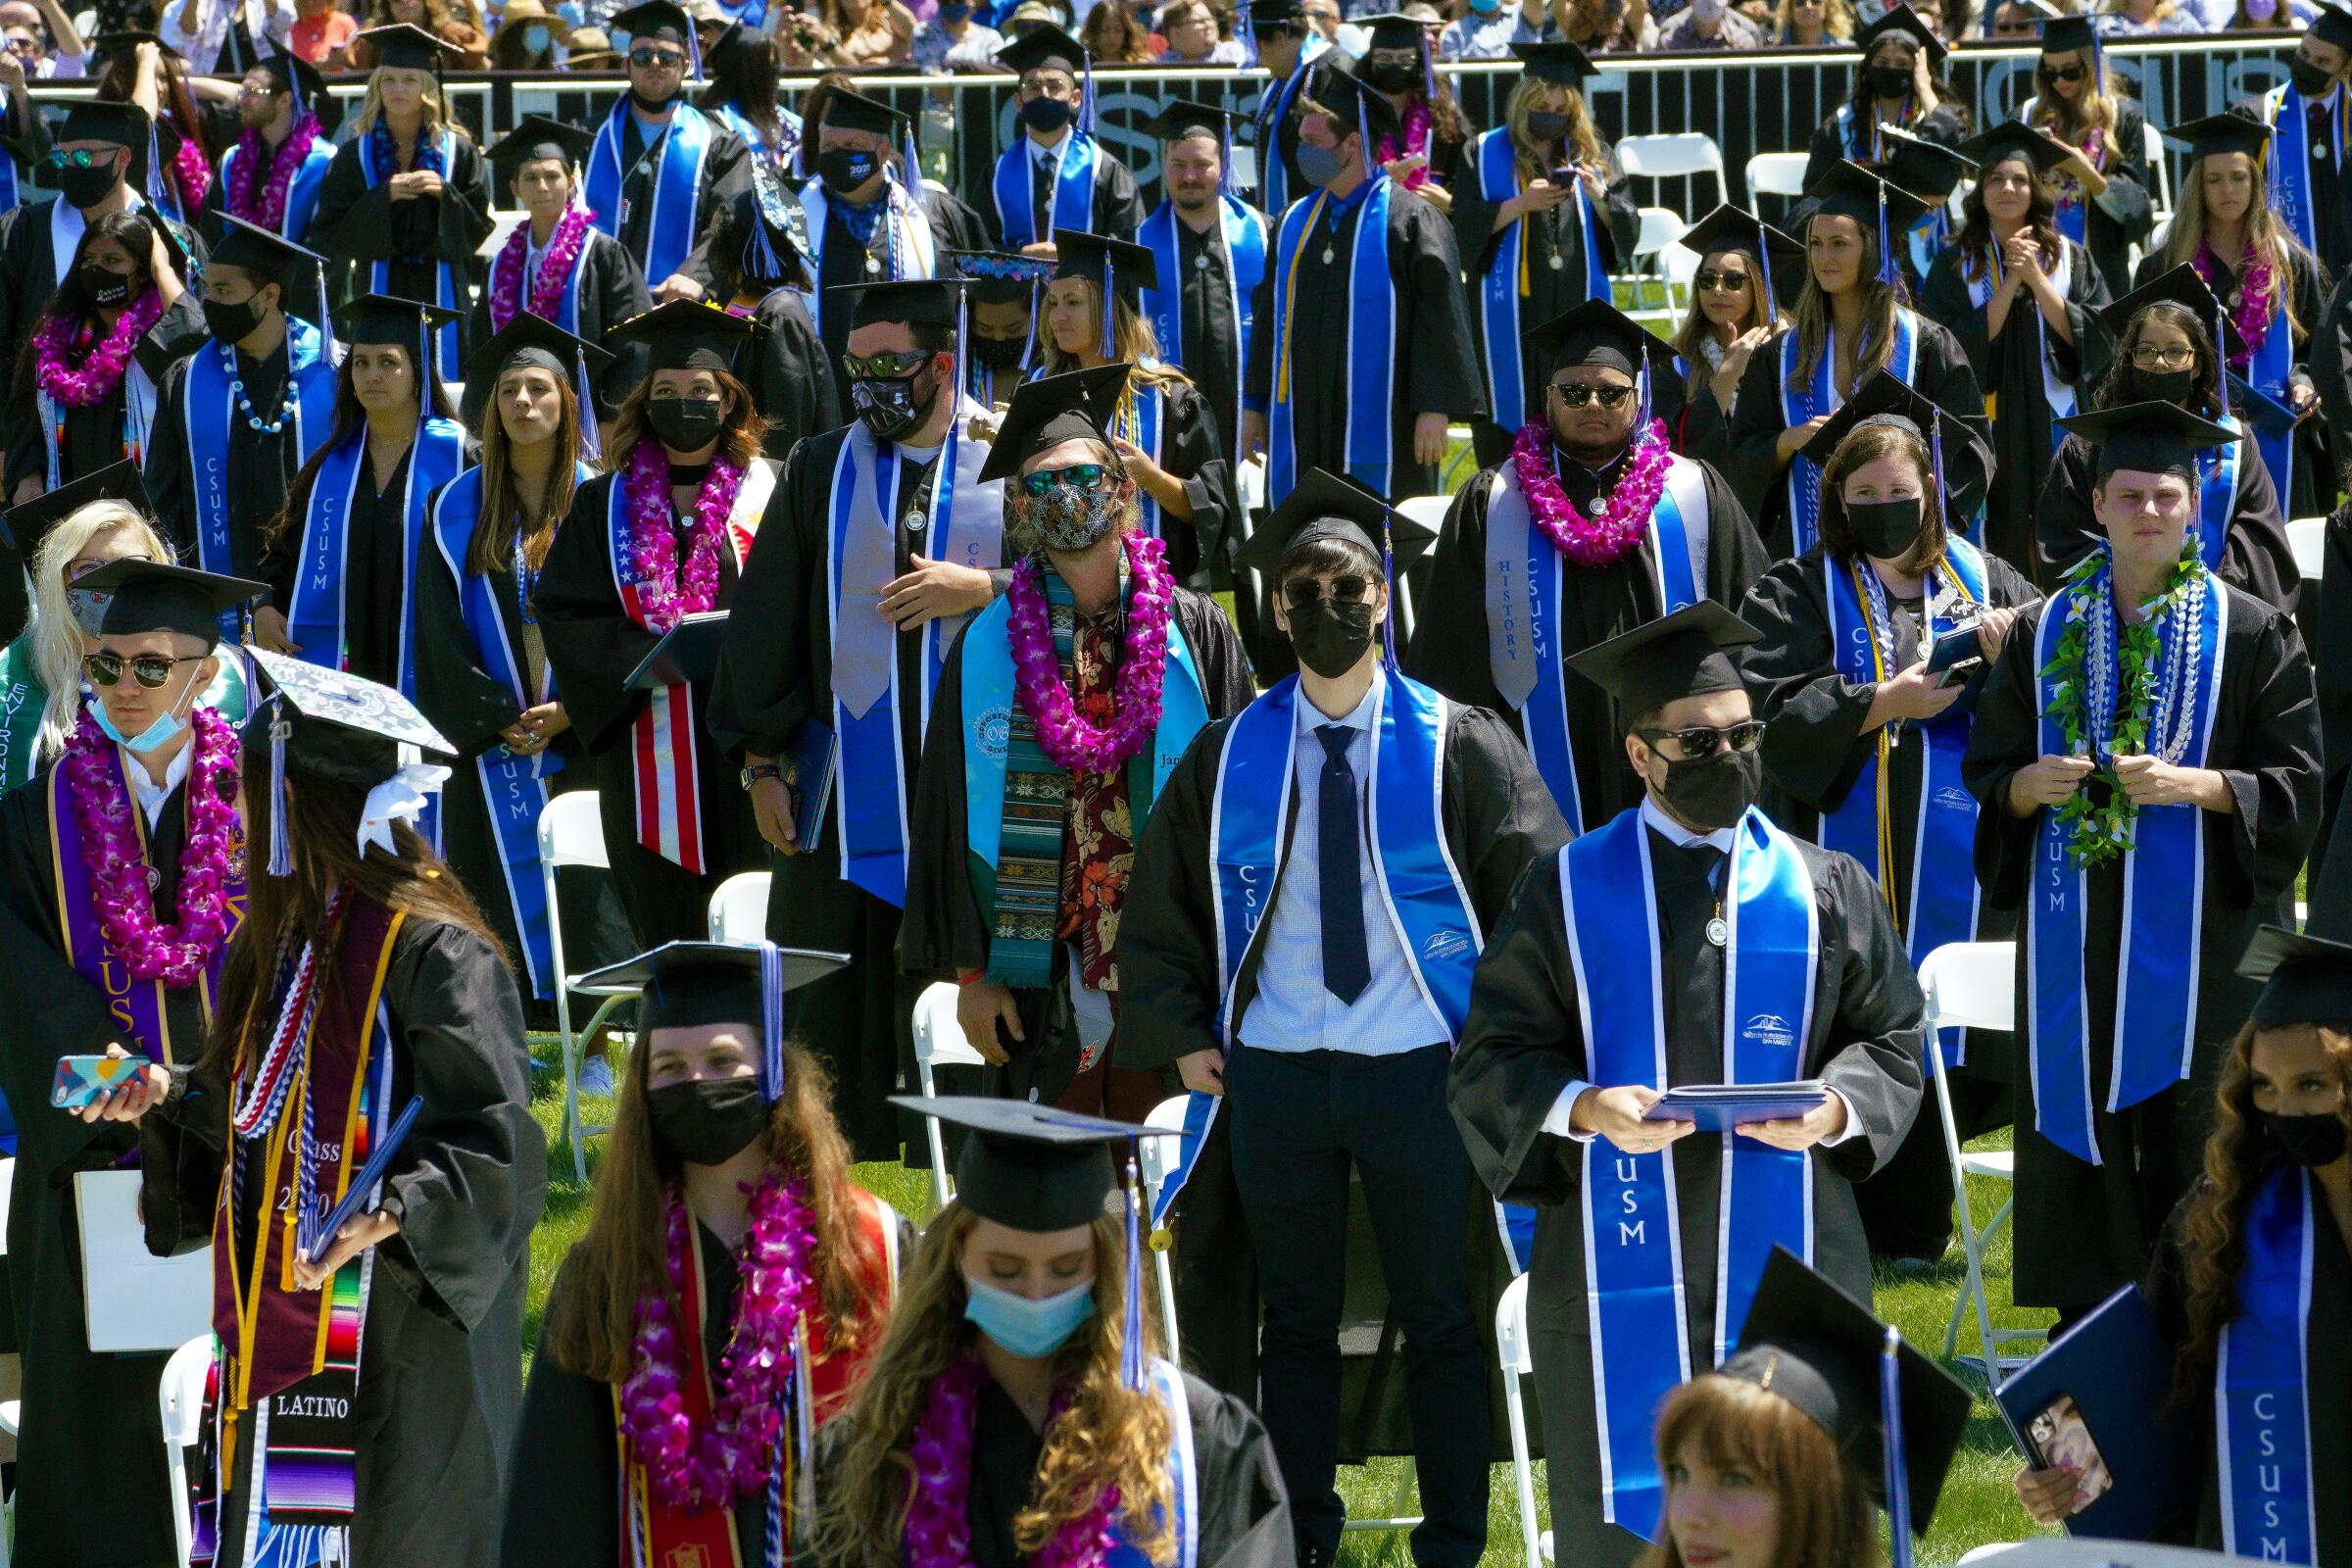 9,210 graduates from the class of 2020 and 2021 at CSUSM attended one of five graduation ceremonies